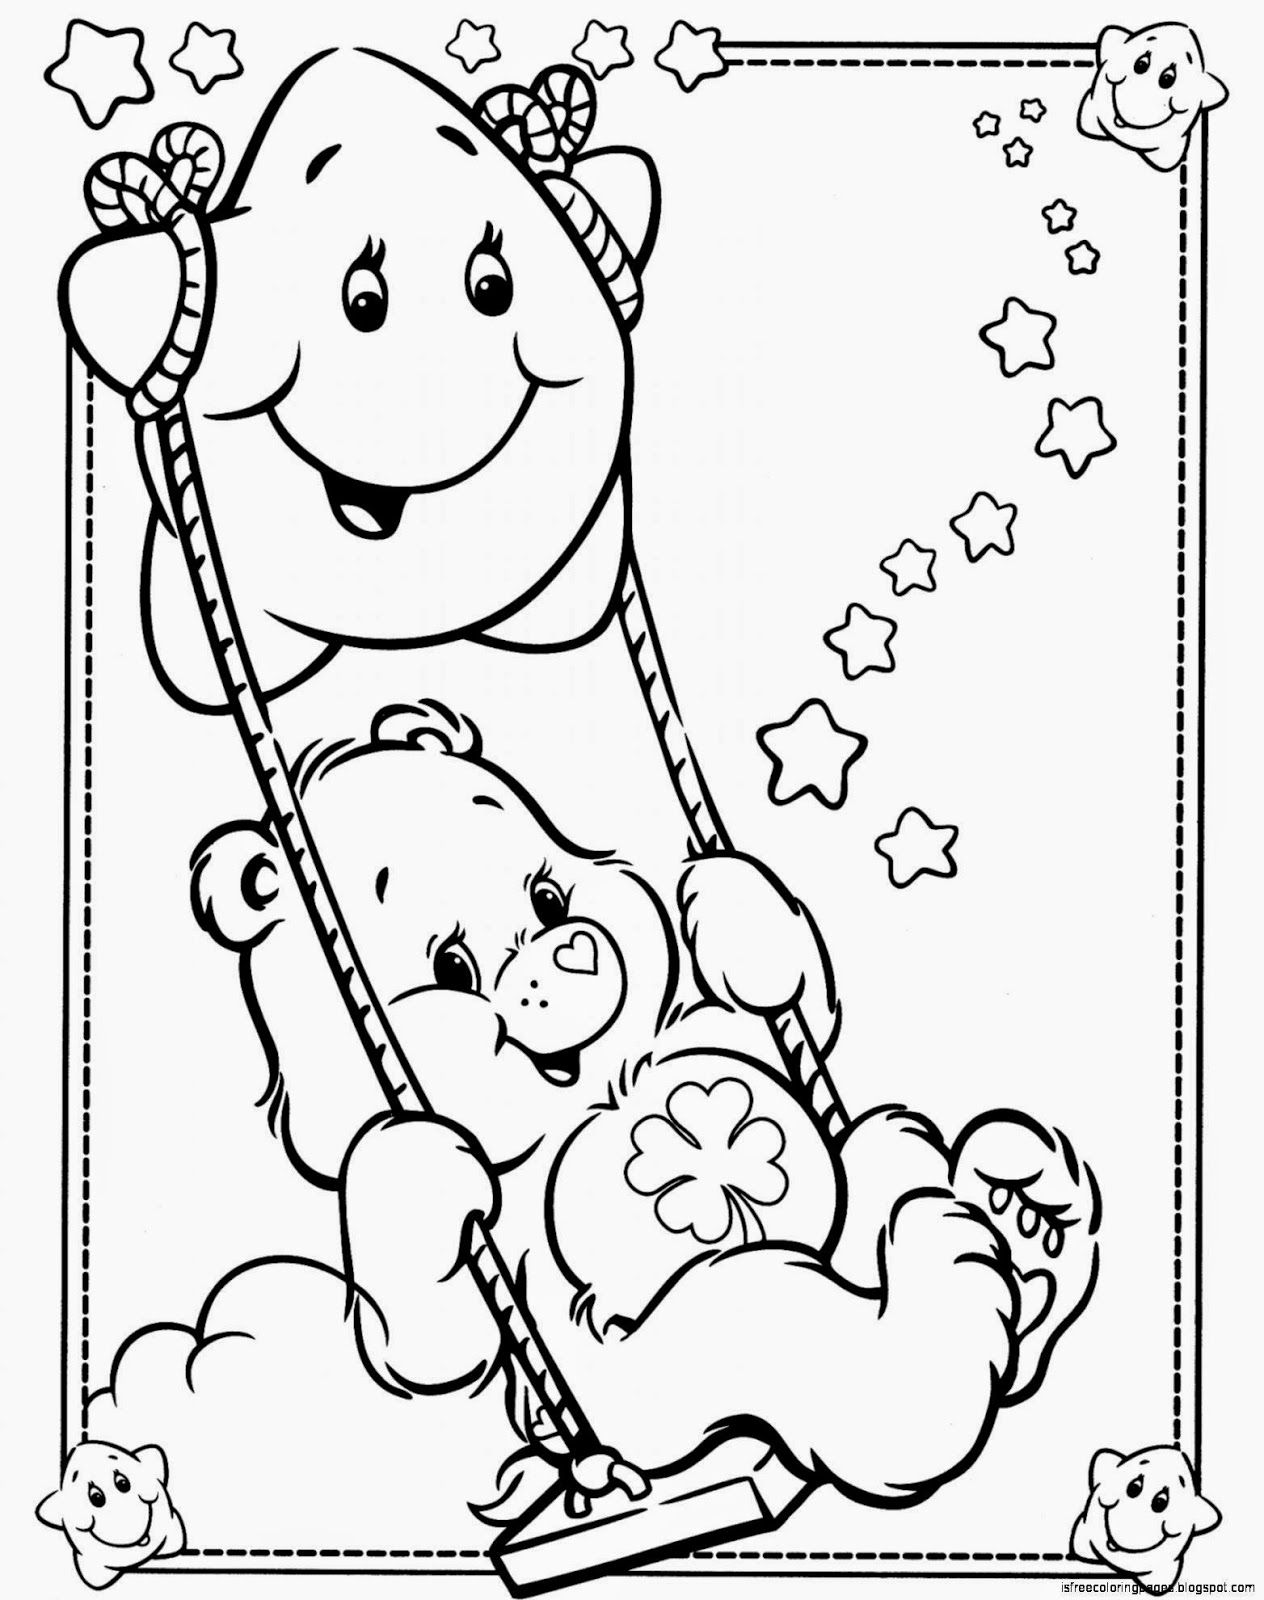 Care Bears Coloring Pages | Free Coloring Pages